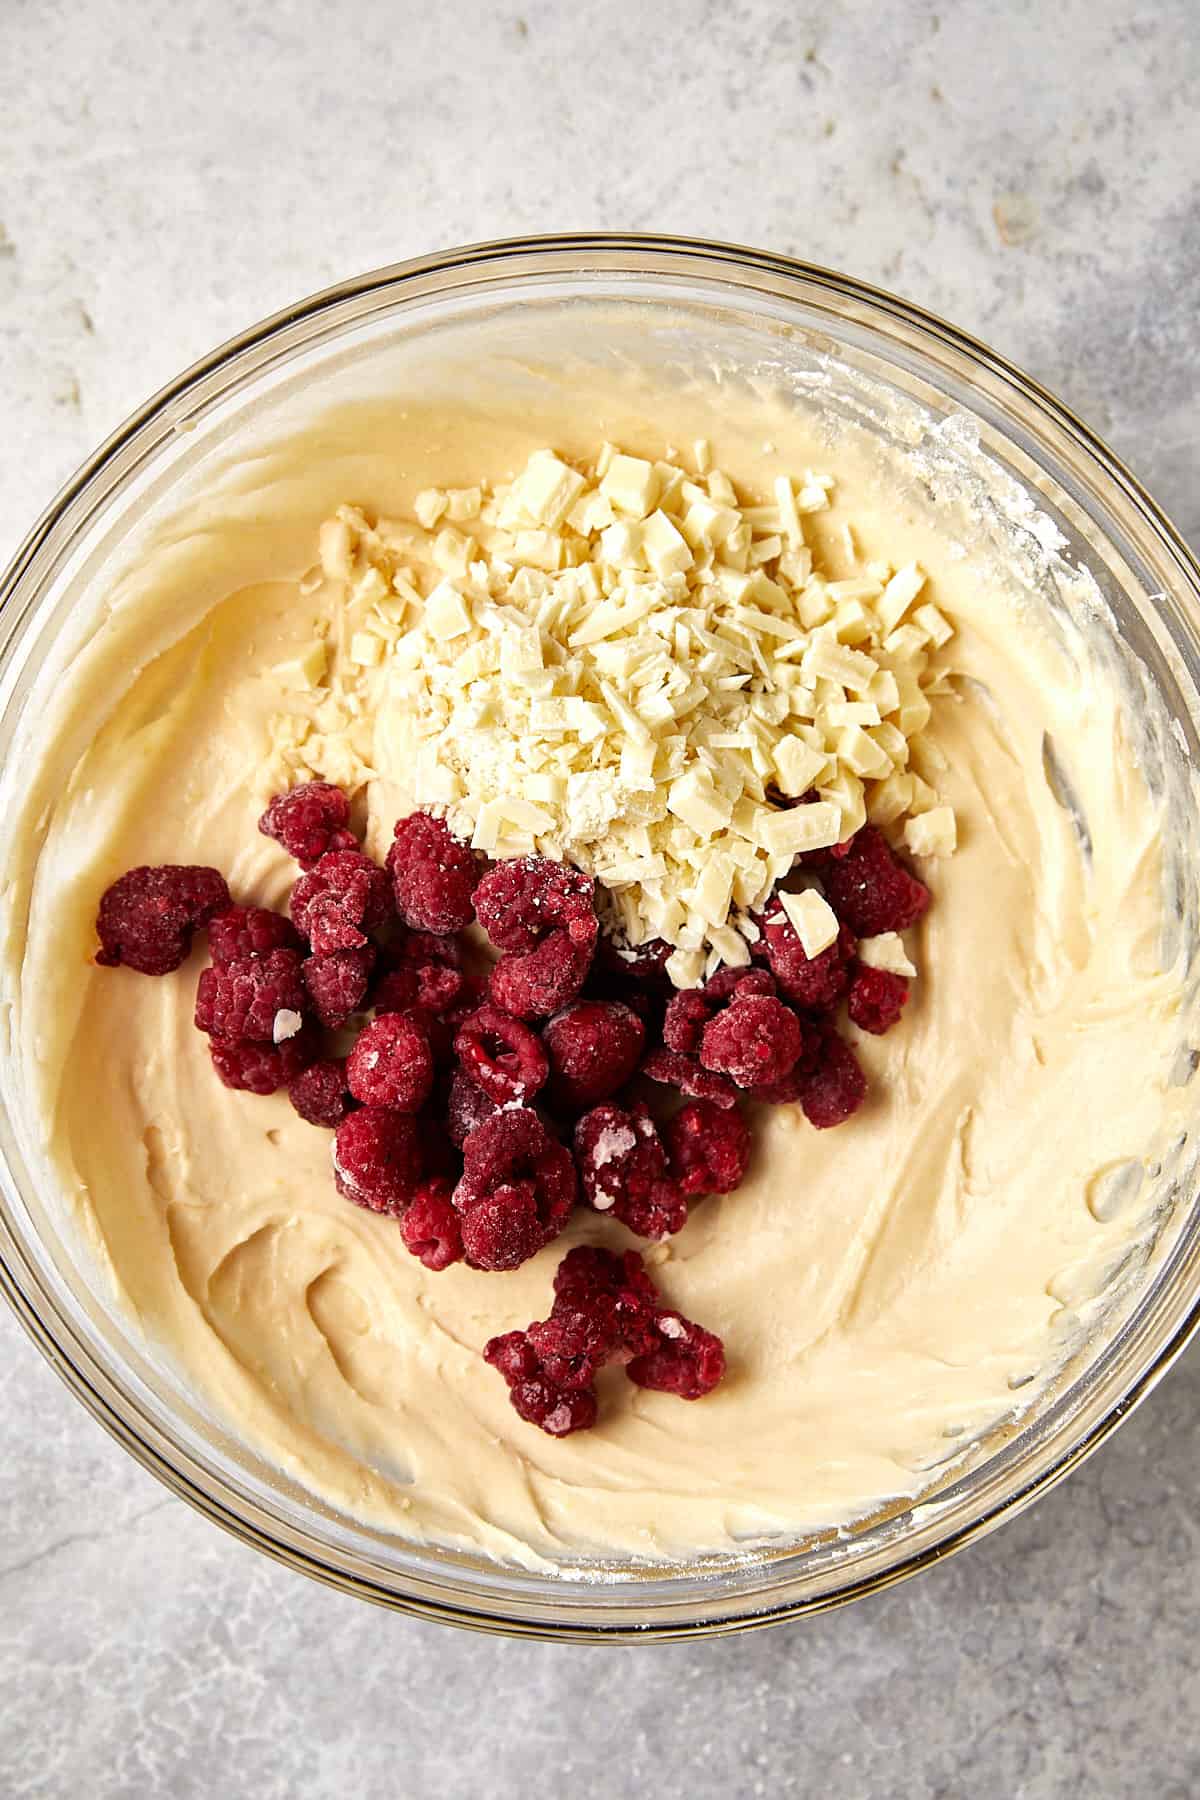 The image shows a glass mixing bowl filled with a smooth, creamy batter. On top of the batter, there is a generous amount of chopped white chocolate and a cluster of red raspberries. The ingredients have not yet been stirred into the batter. 